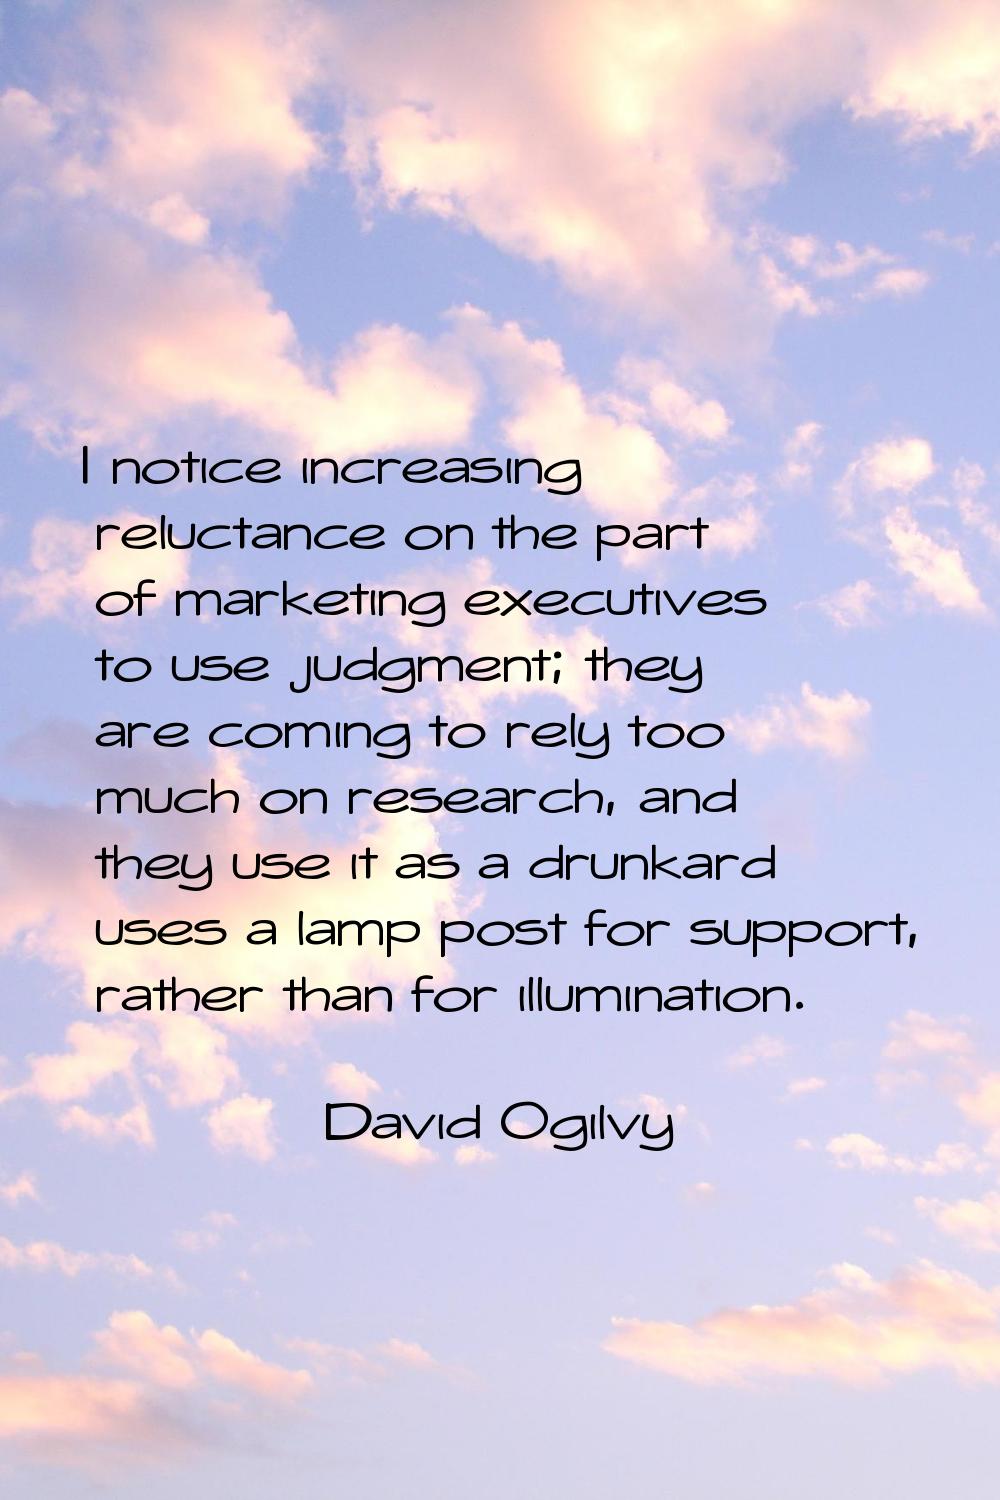 I notice increasing reluctance on the part of marketing executives to use judgment; they are coming